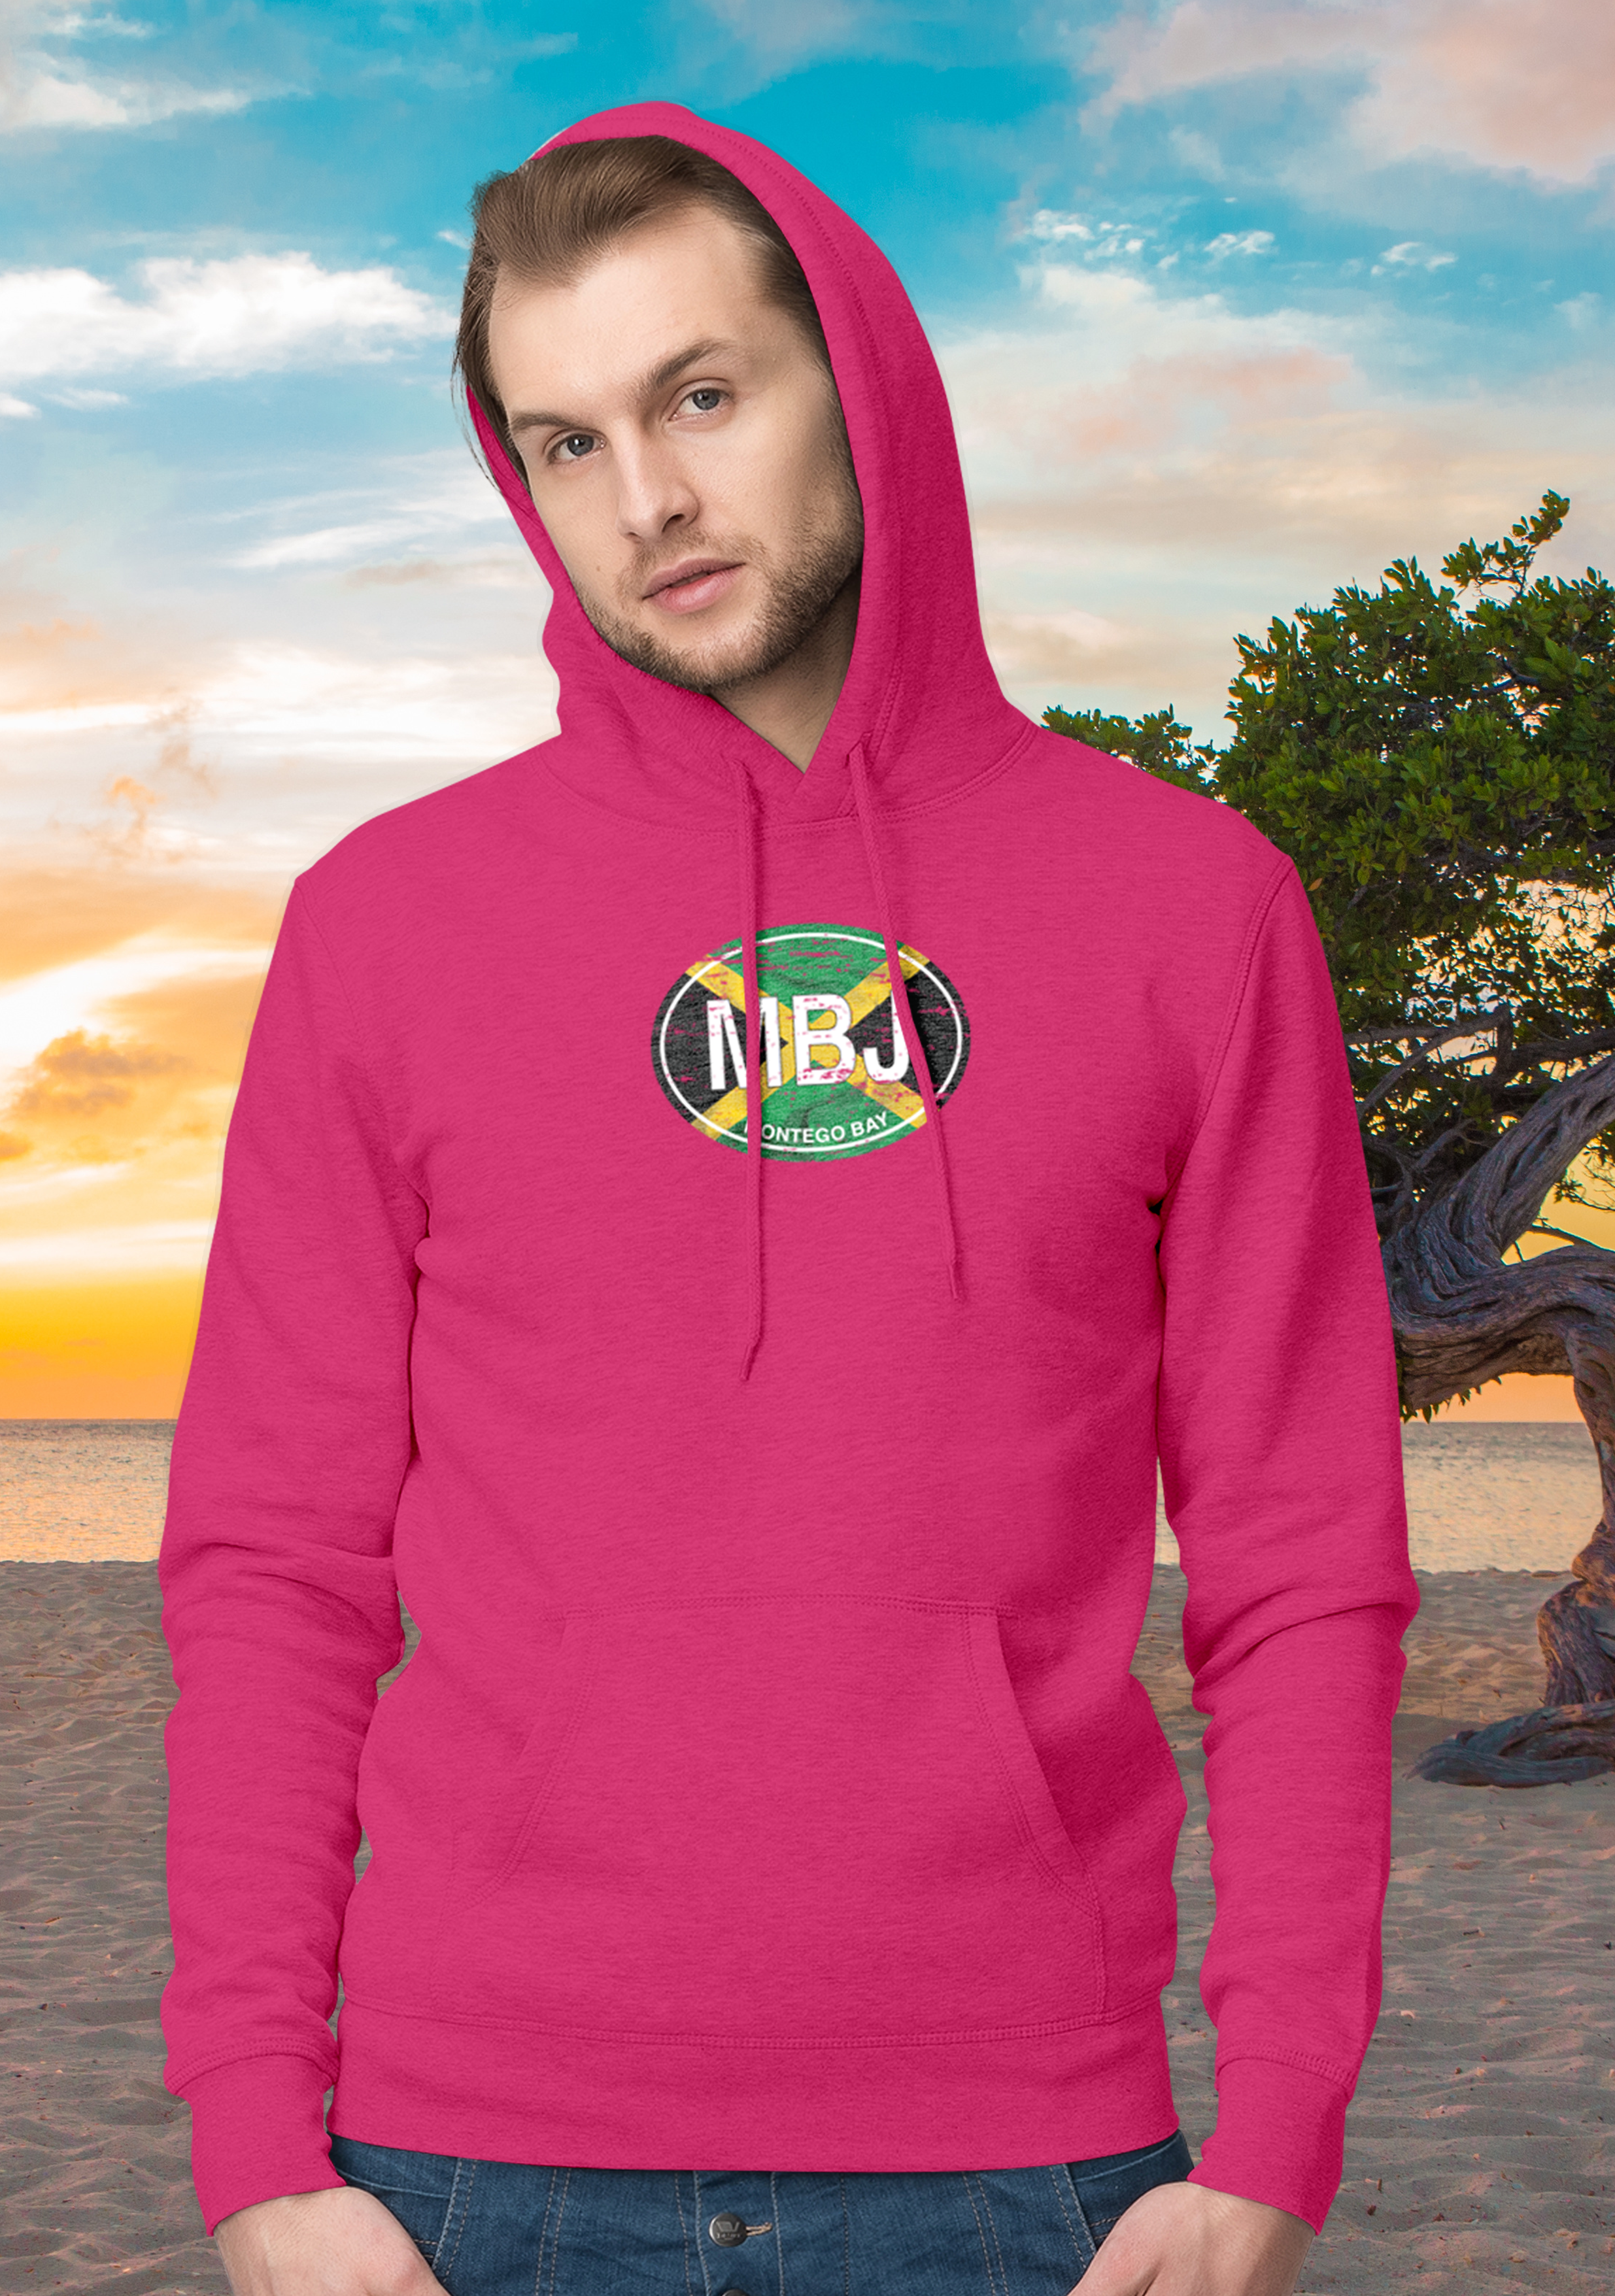 Montego Bay Men's and Women's Flag Adult Hoodie - My Destination Location